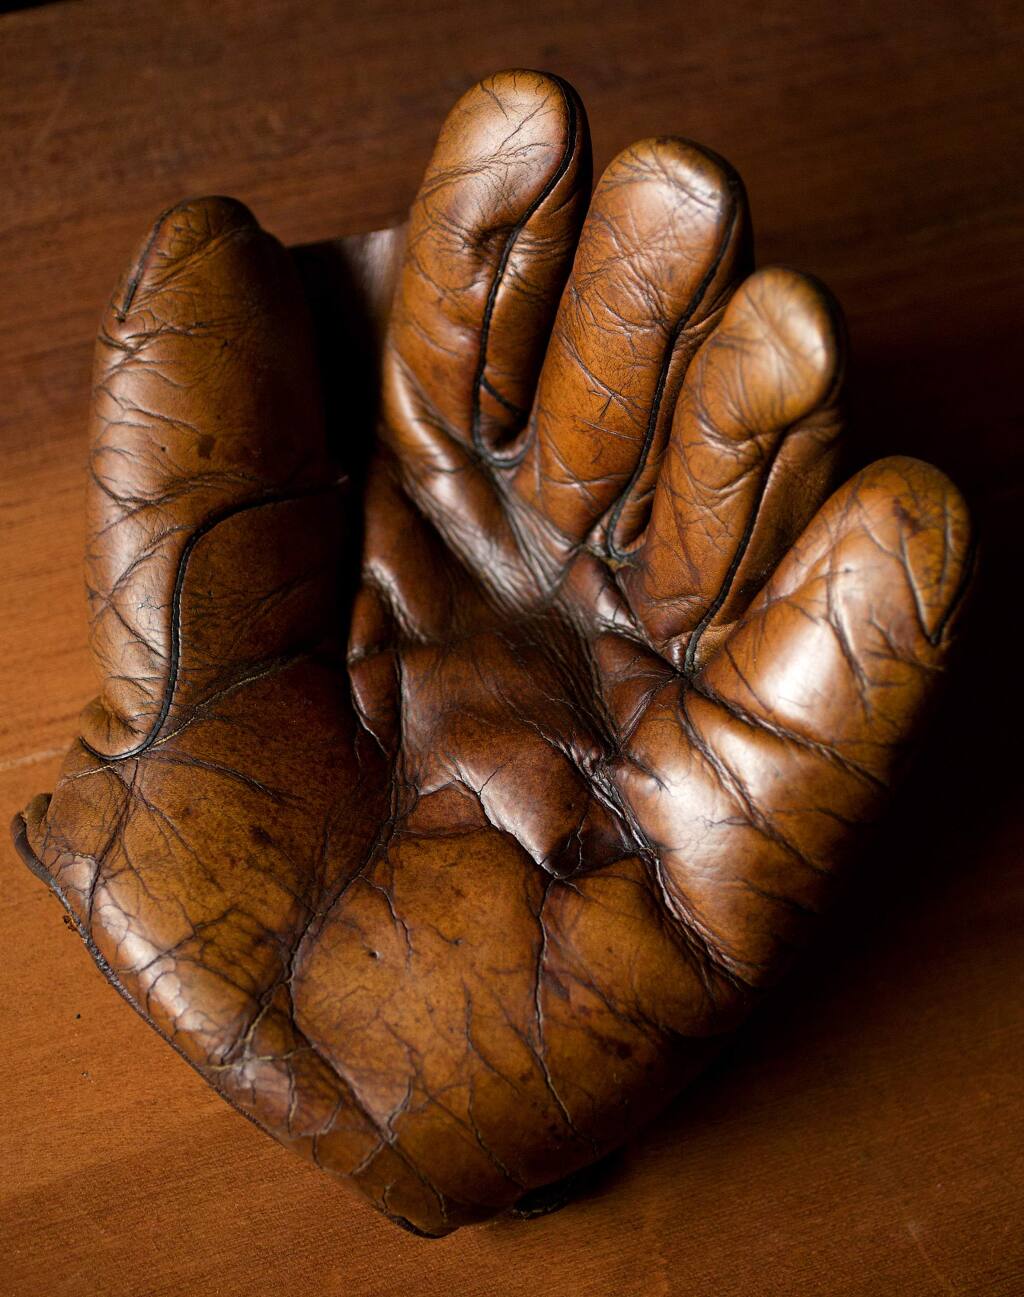 A glove circa 1900. Fran Fleet, 'The Glove Lady,' has been repairing baseball gloves out of her tiny Cotati shop for over 40 years. (JOHN BURGESS / The Press Democrat)